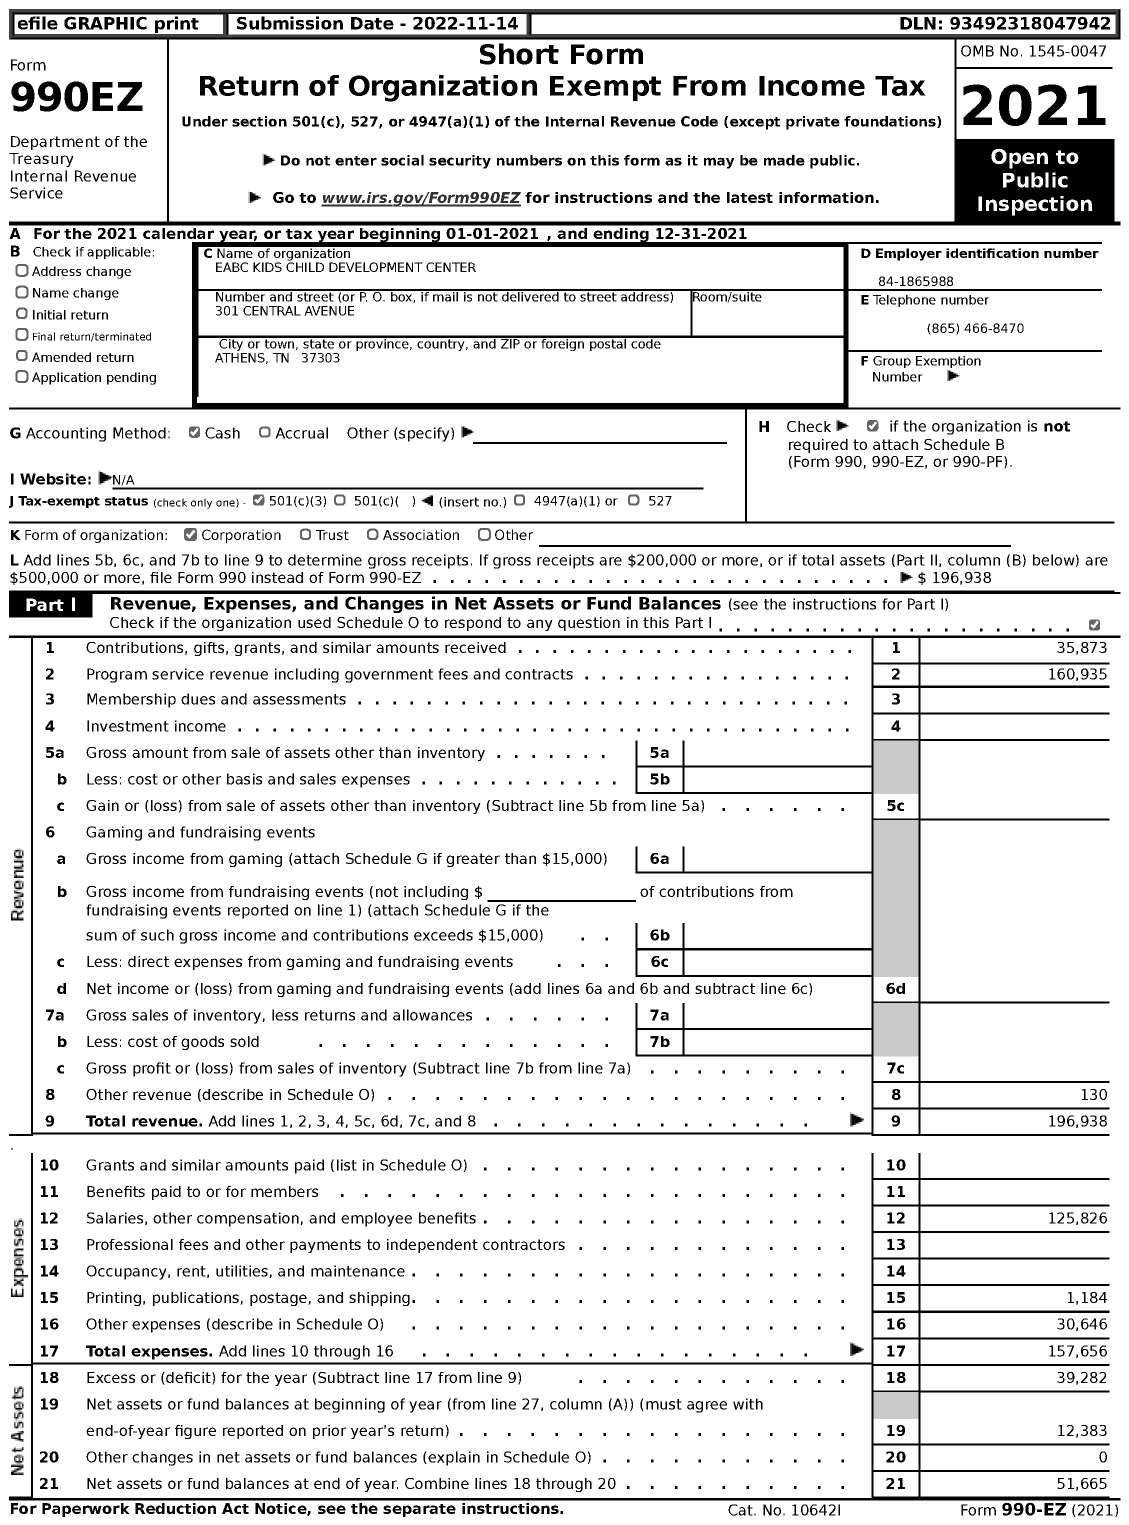 Image of first page of 2021 Form 990EZ for Eabc Kids Child Development Center